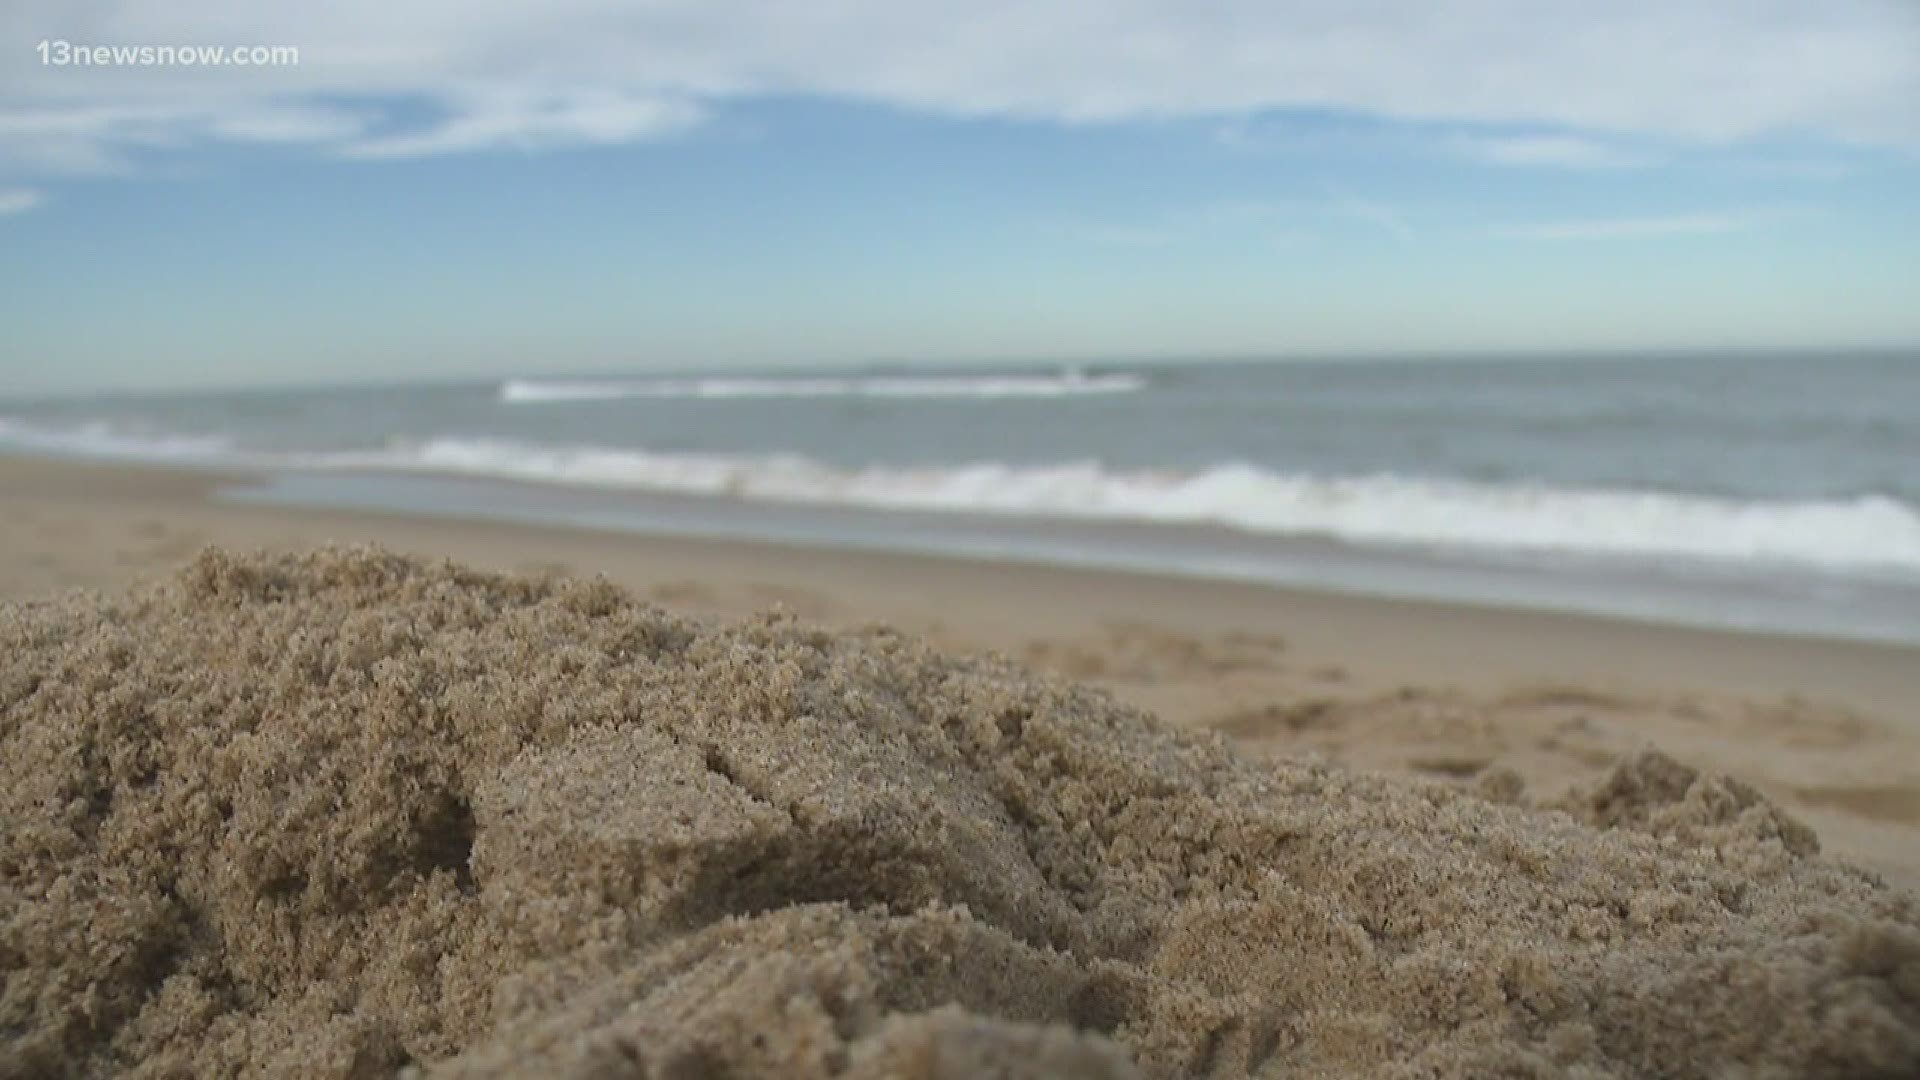 13News Now Dana Smith spoke with Virginia Beach Mayor Bobby Dyer about the plan for beaches as the state begins to reopen during the pandemic.